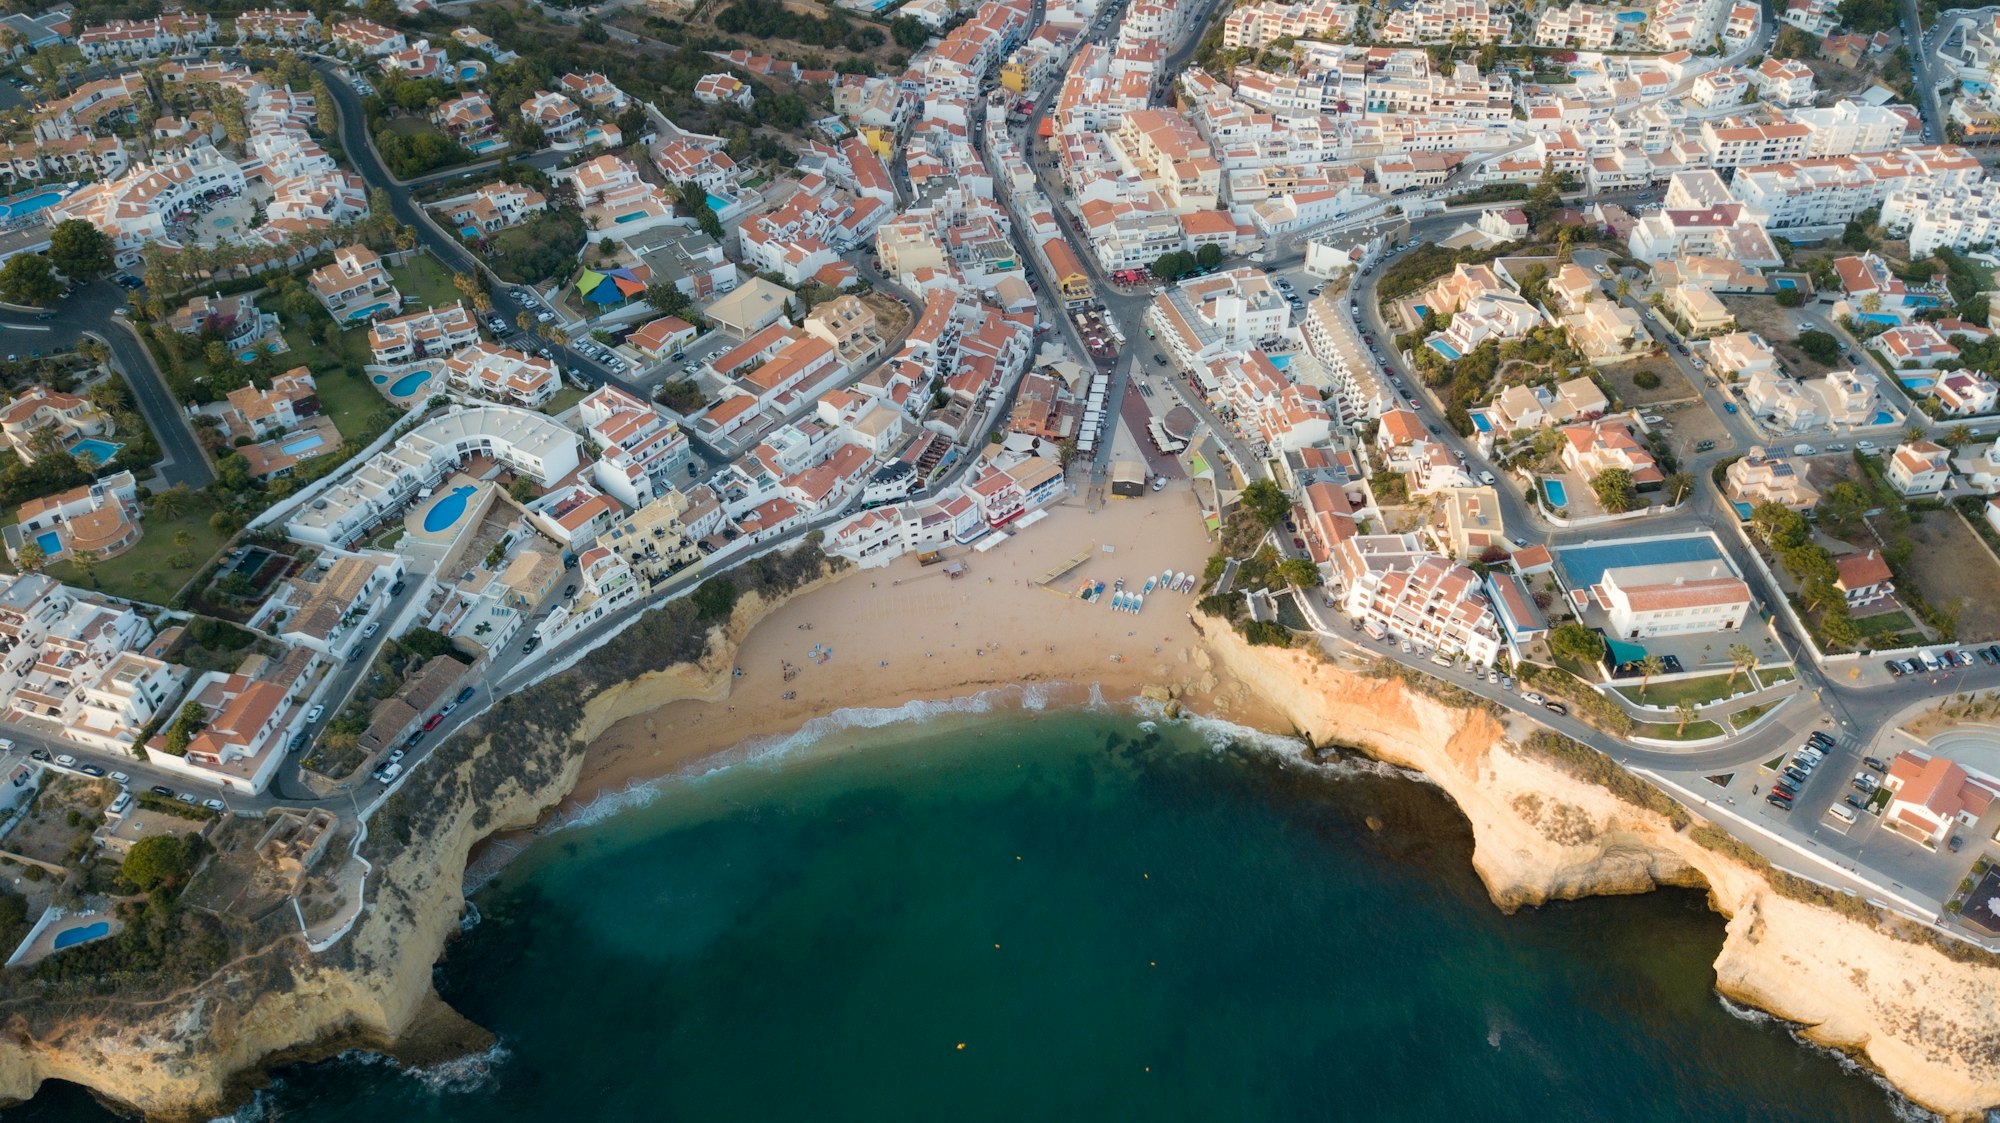 Little beach town in the south of Portugal seen from a drone.